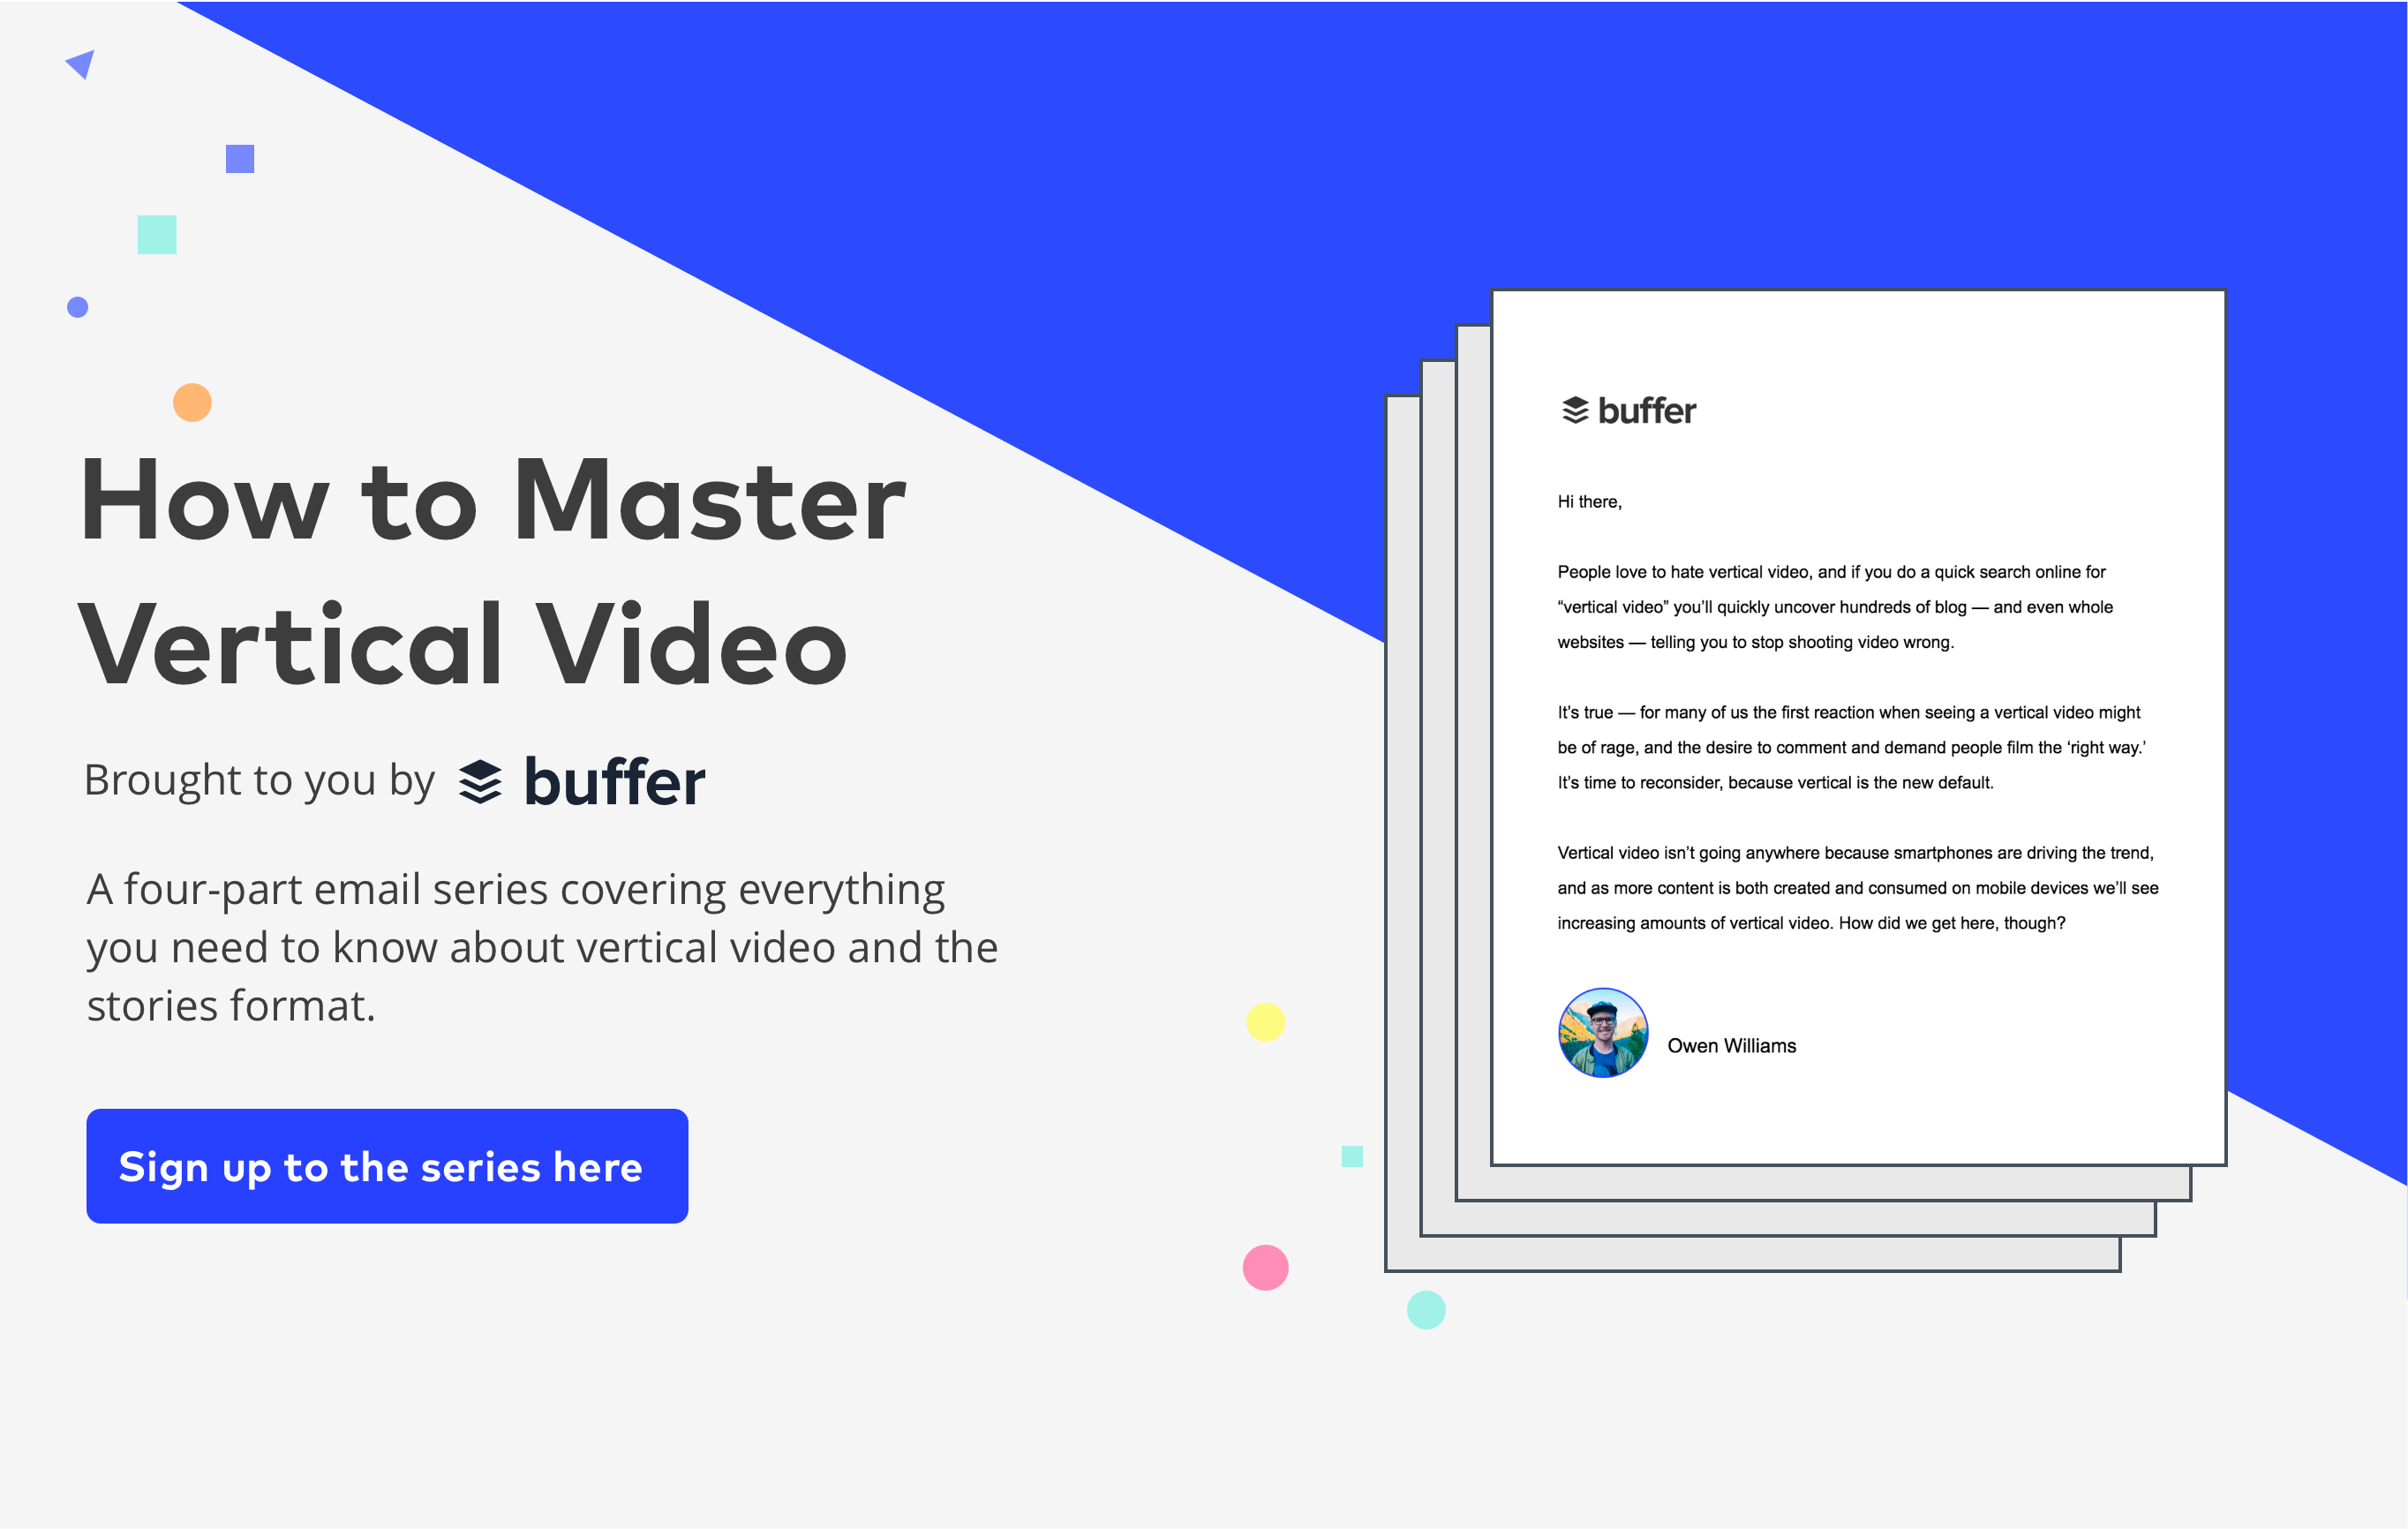 How to Master Vertical Video